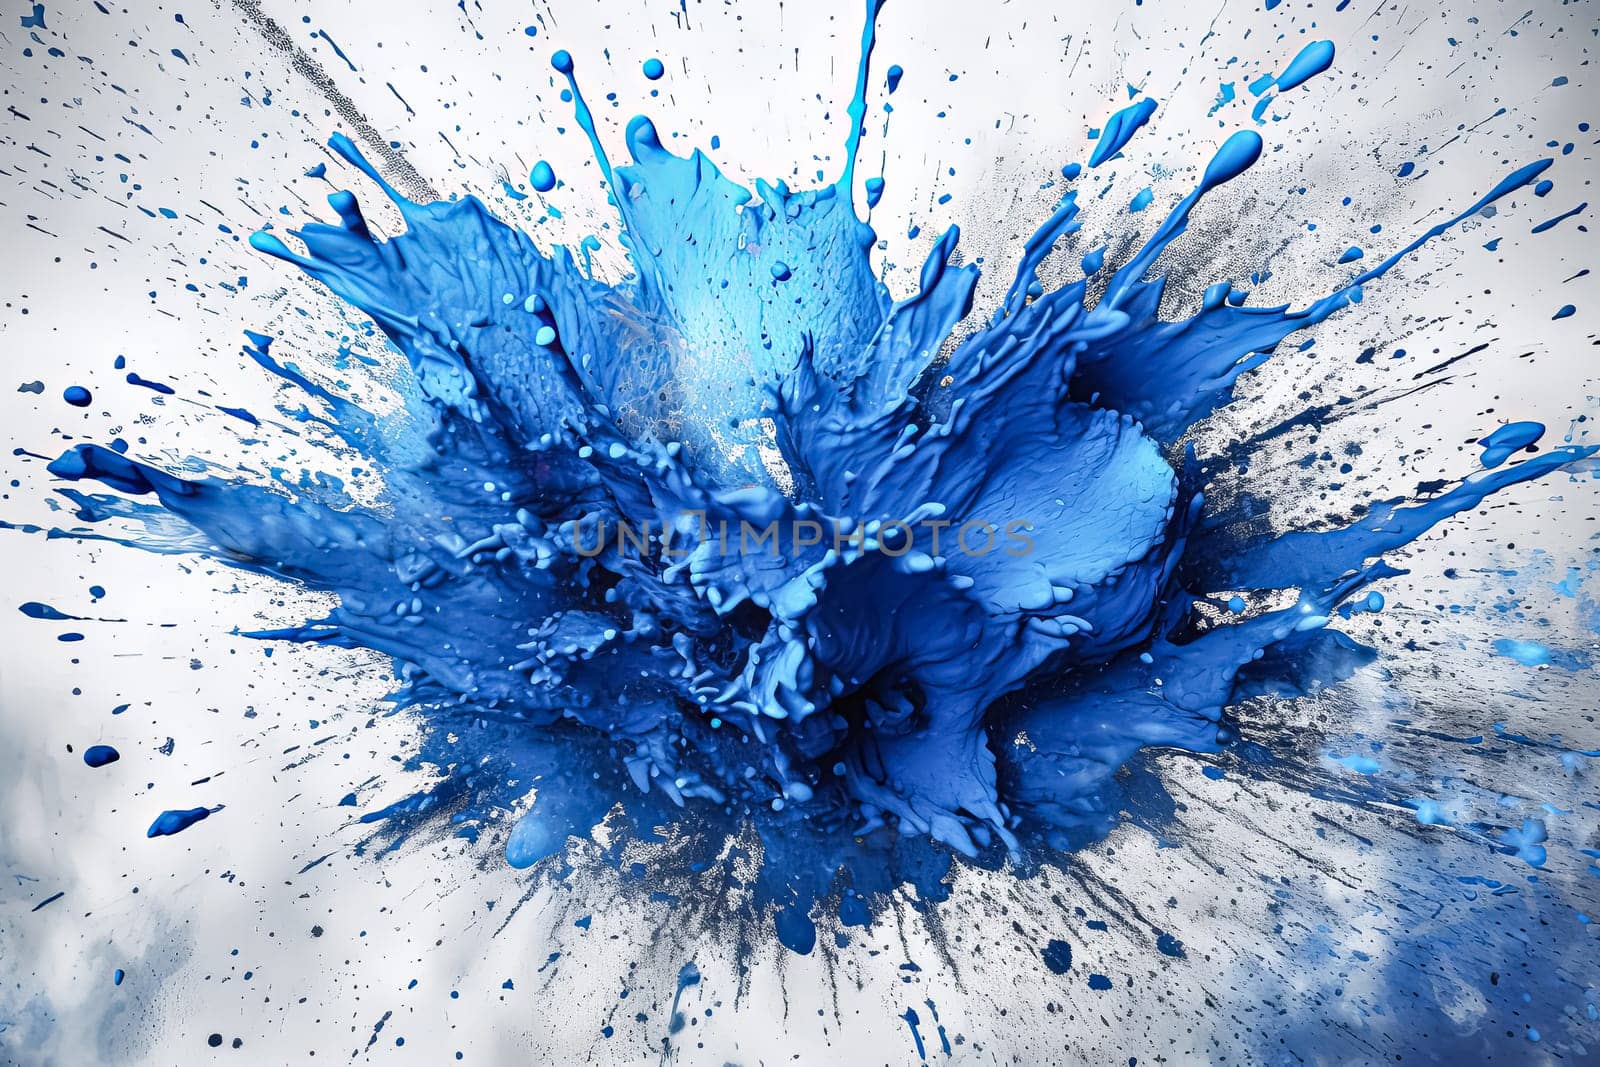 A splash of blue paint on a white background. The blue paint is splattered and has a lot of texture. Scene is energetic and dynamic